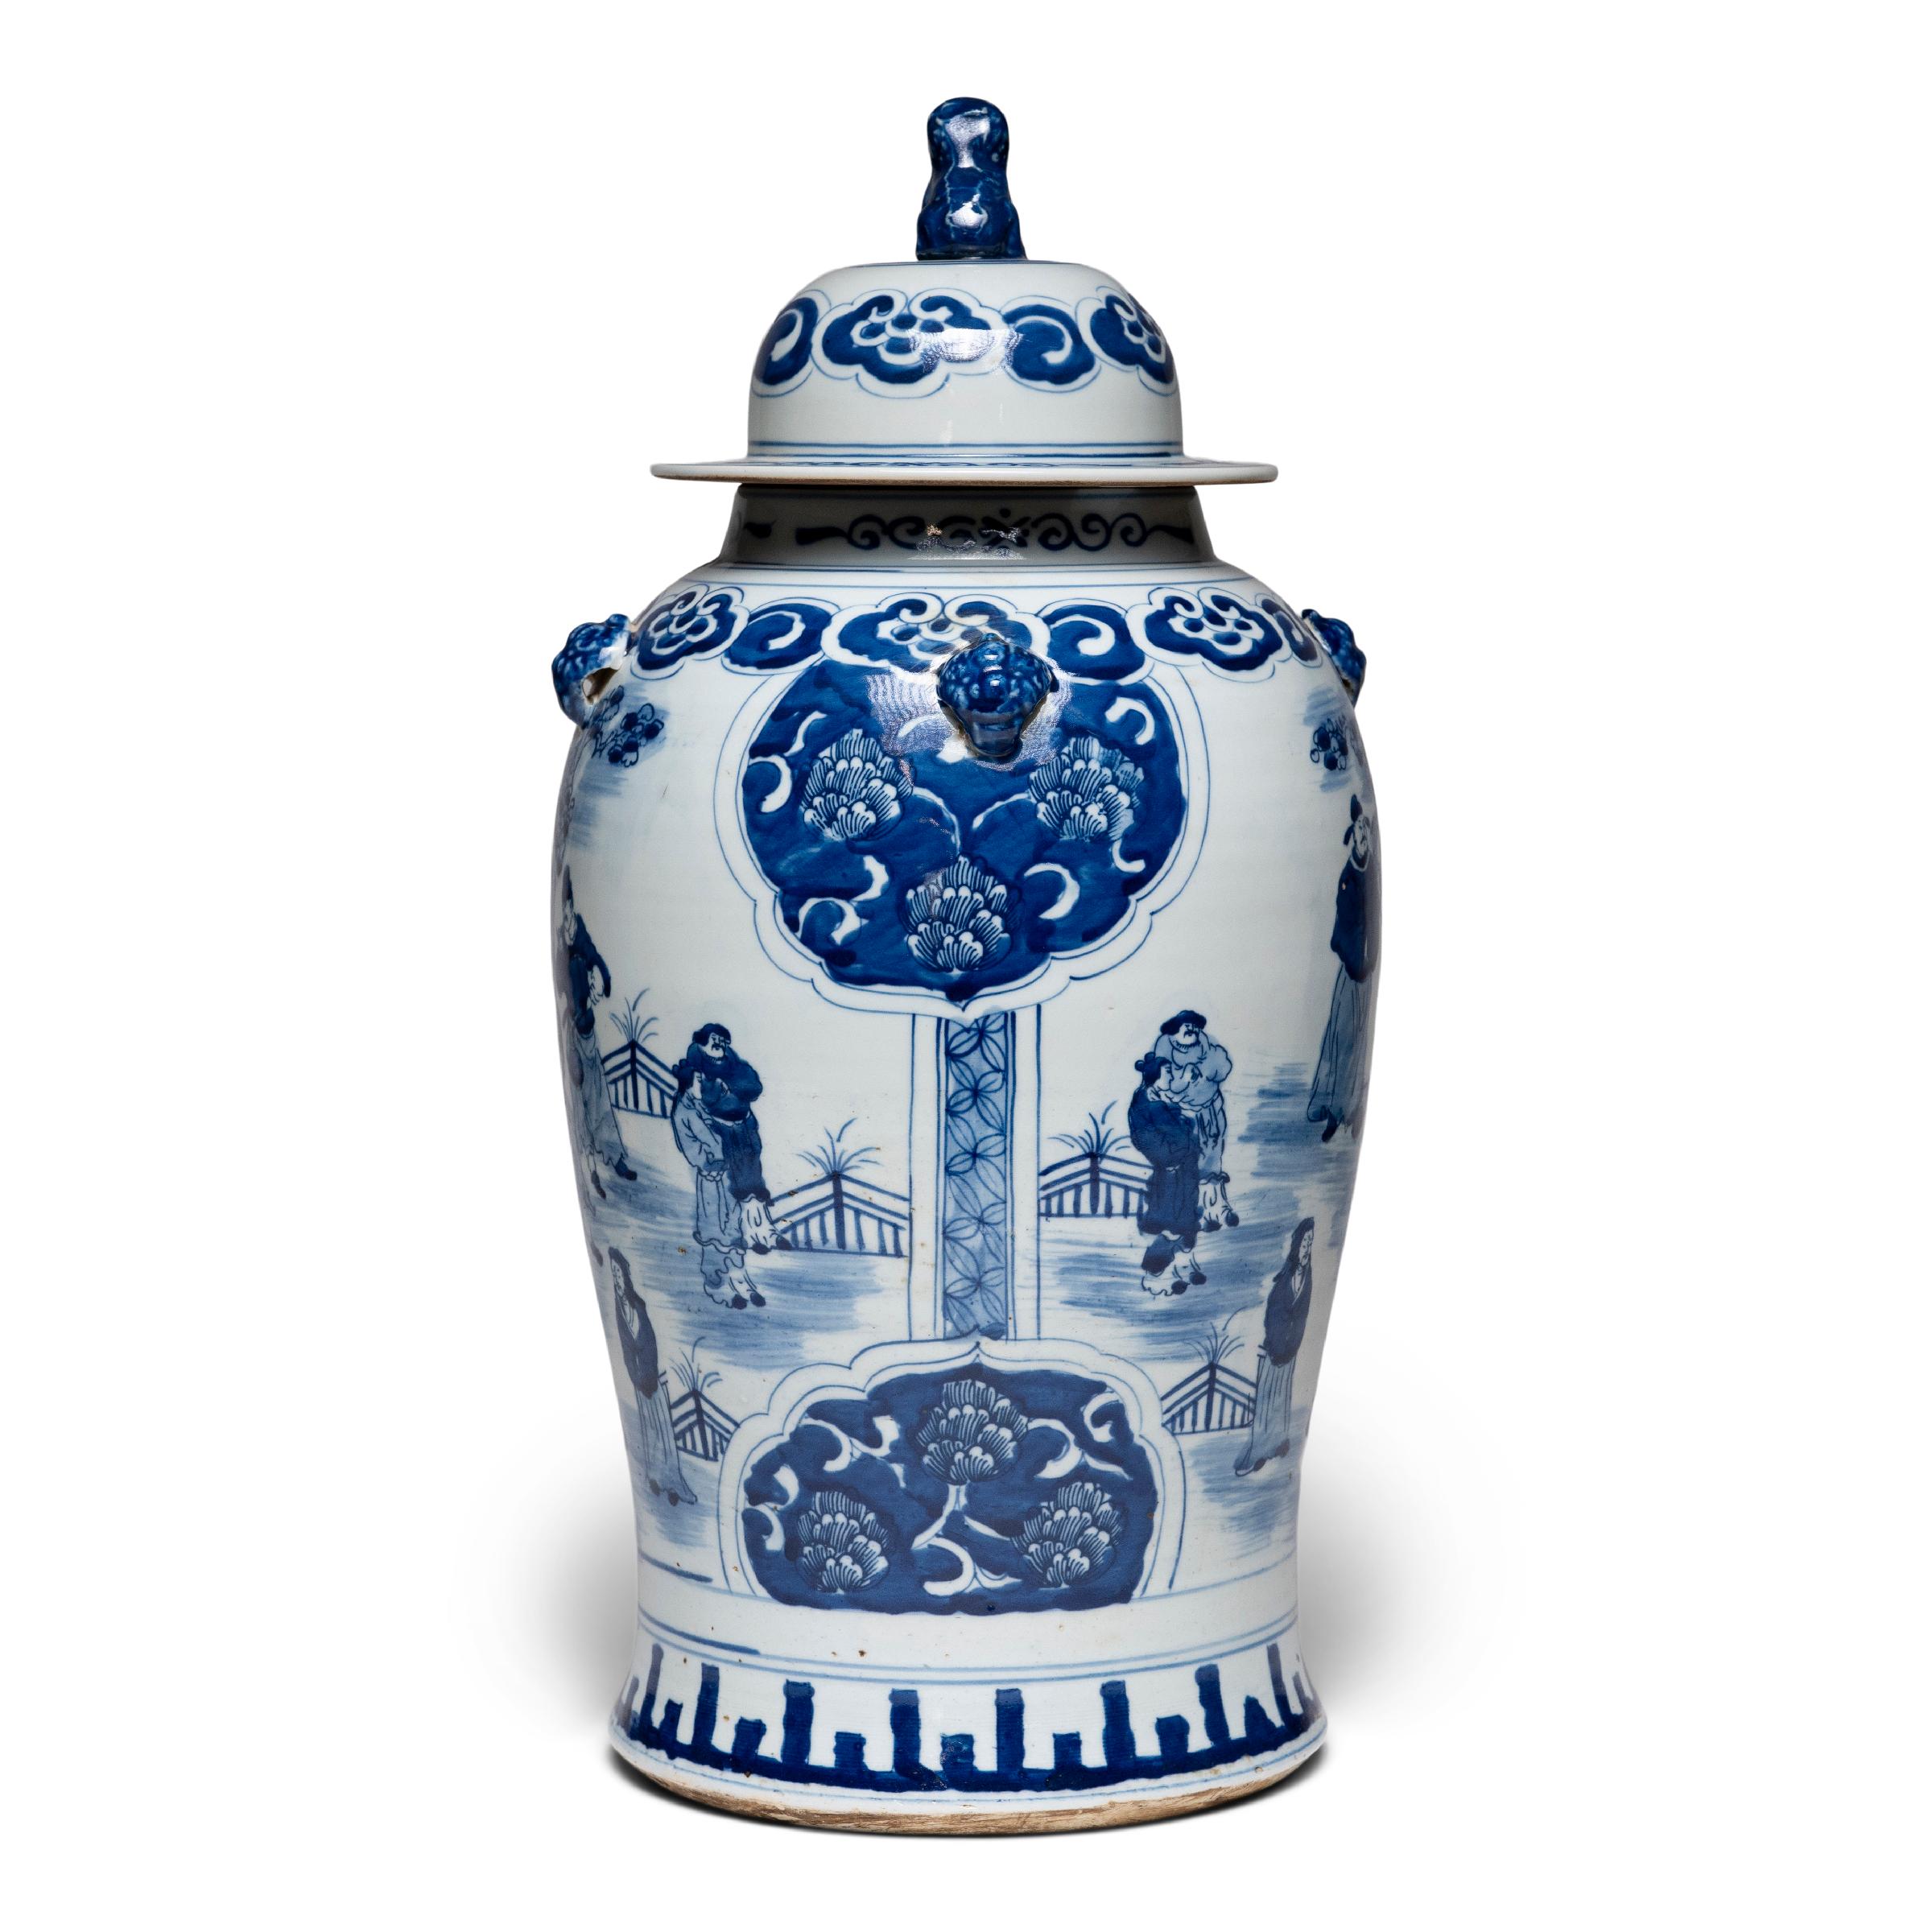 This contemporary baluster jar from artisans in Jiangxi province continues the centuries-old tradition of Chinese blue-and-white porcelain. Also known as a ginger jar or temple jar, jars of this shape were popular with noblemen who sent them to